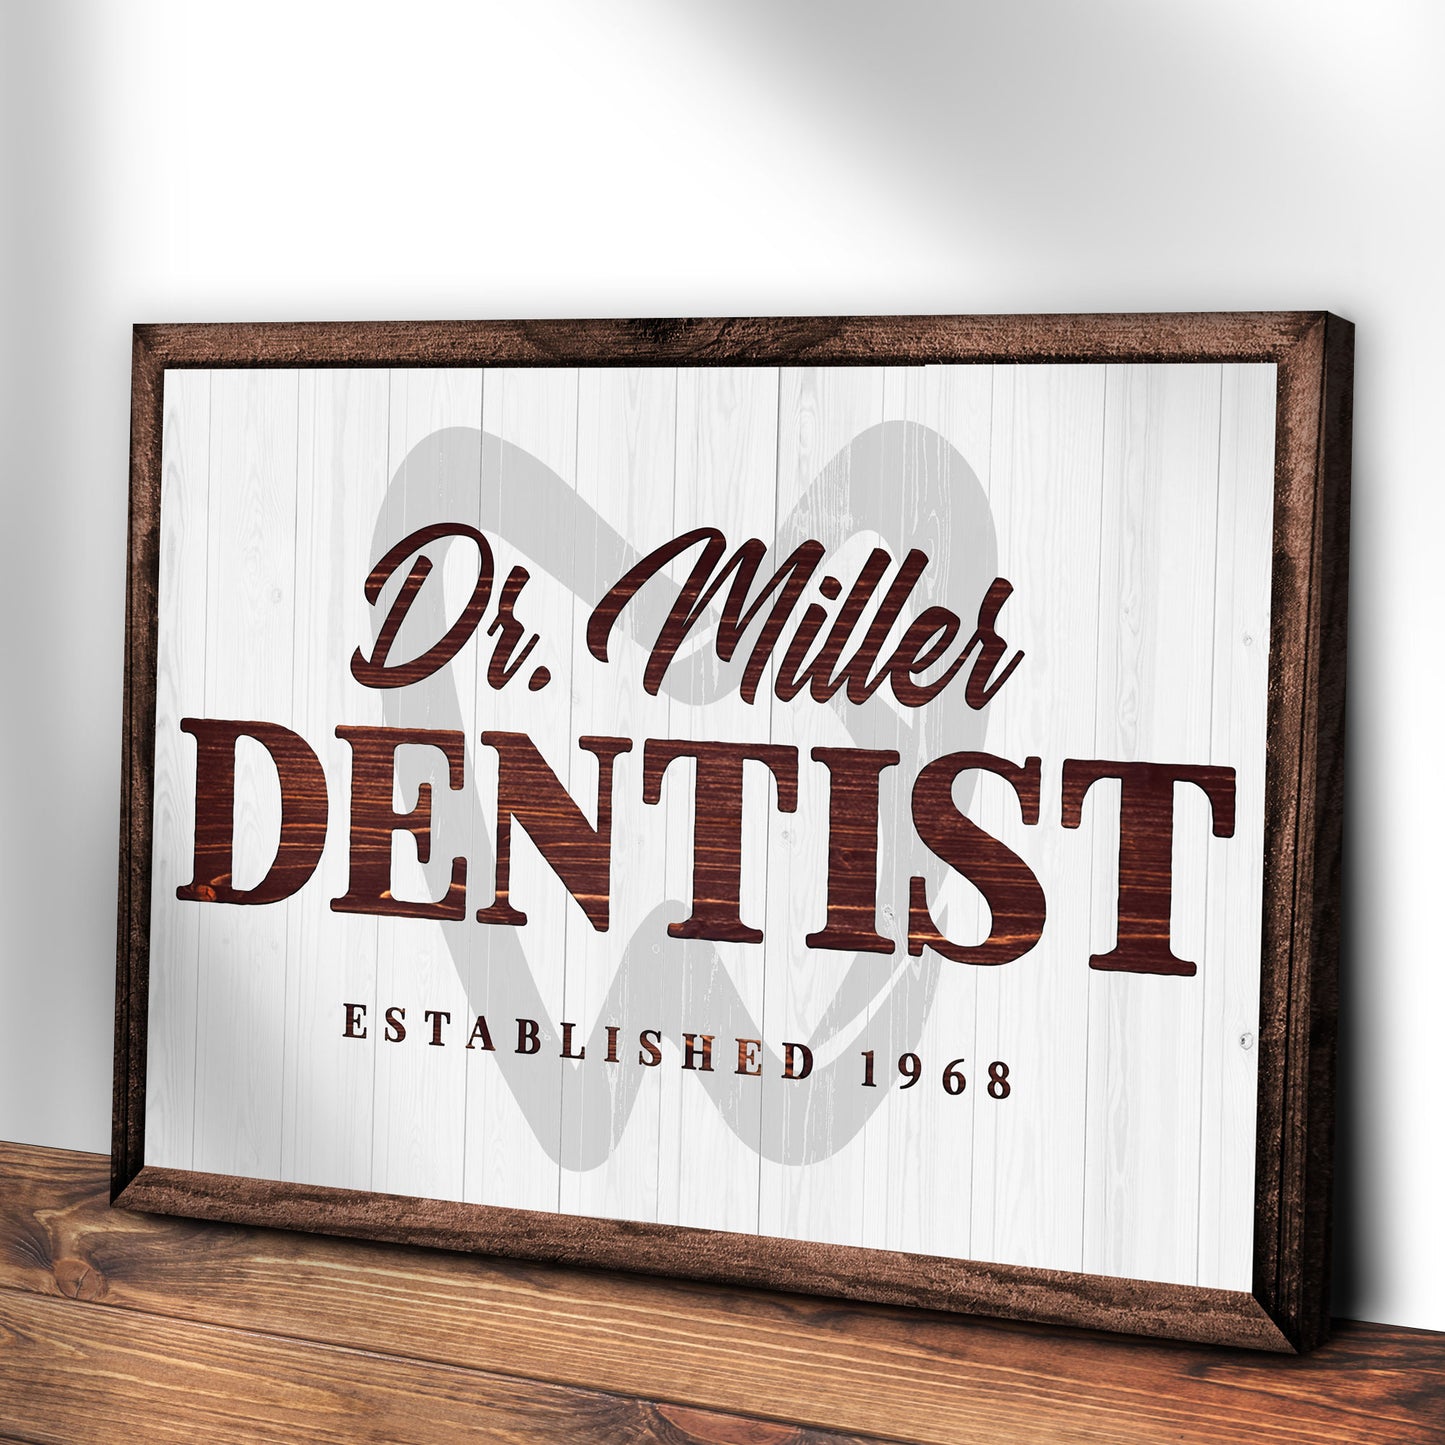 Dentist Sign - Image by Tailored Canvases